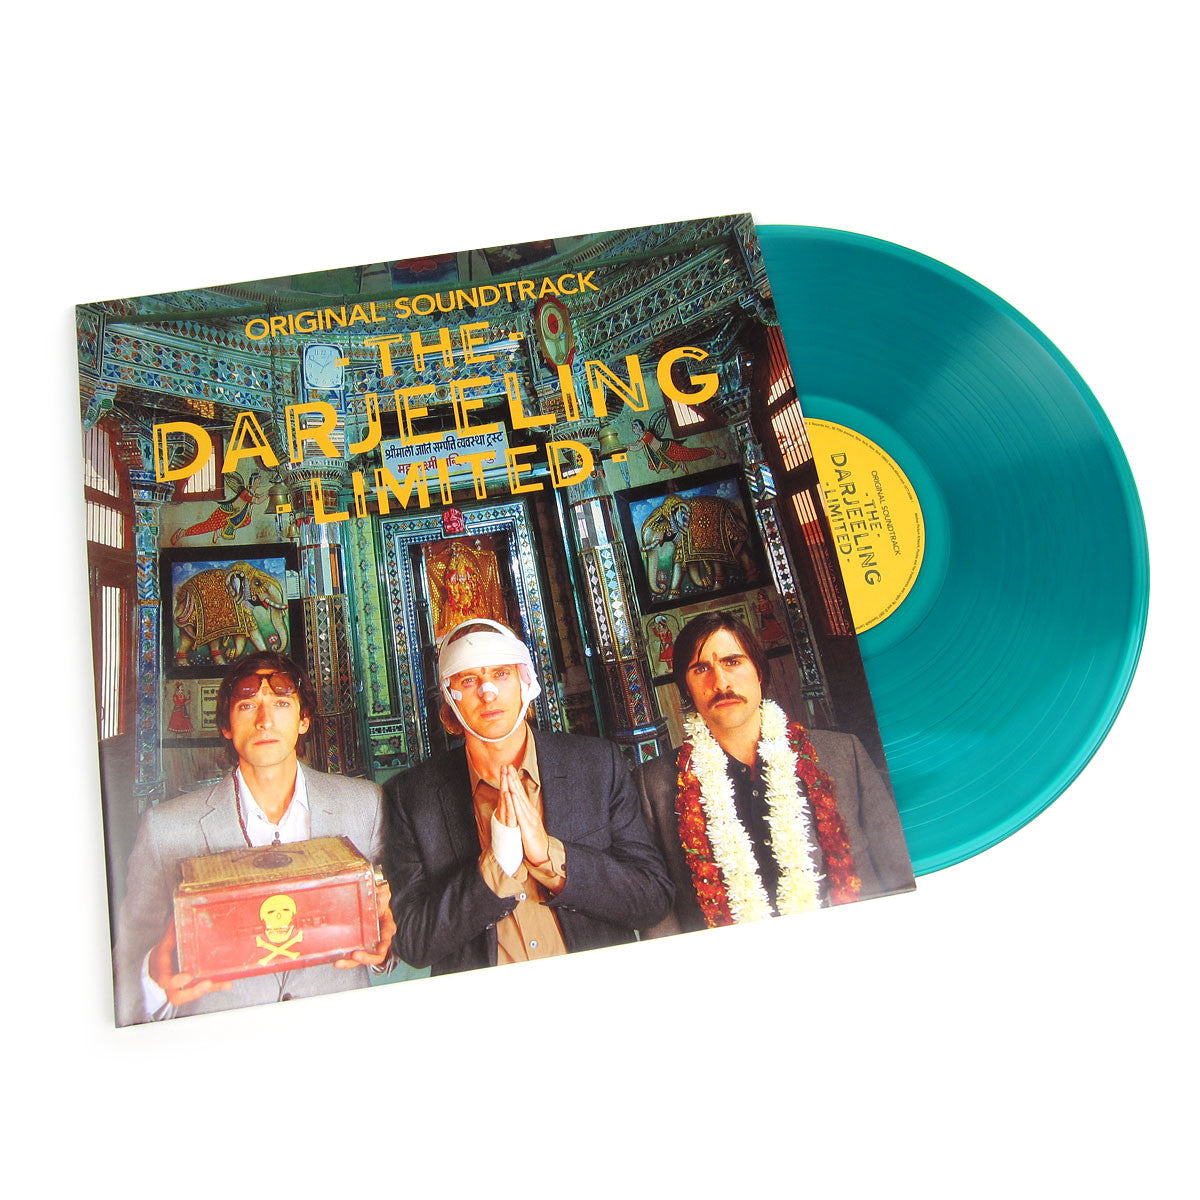 Watch The Darjeeling Limited, The Front Row